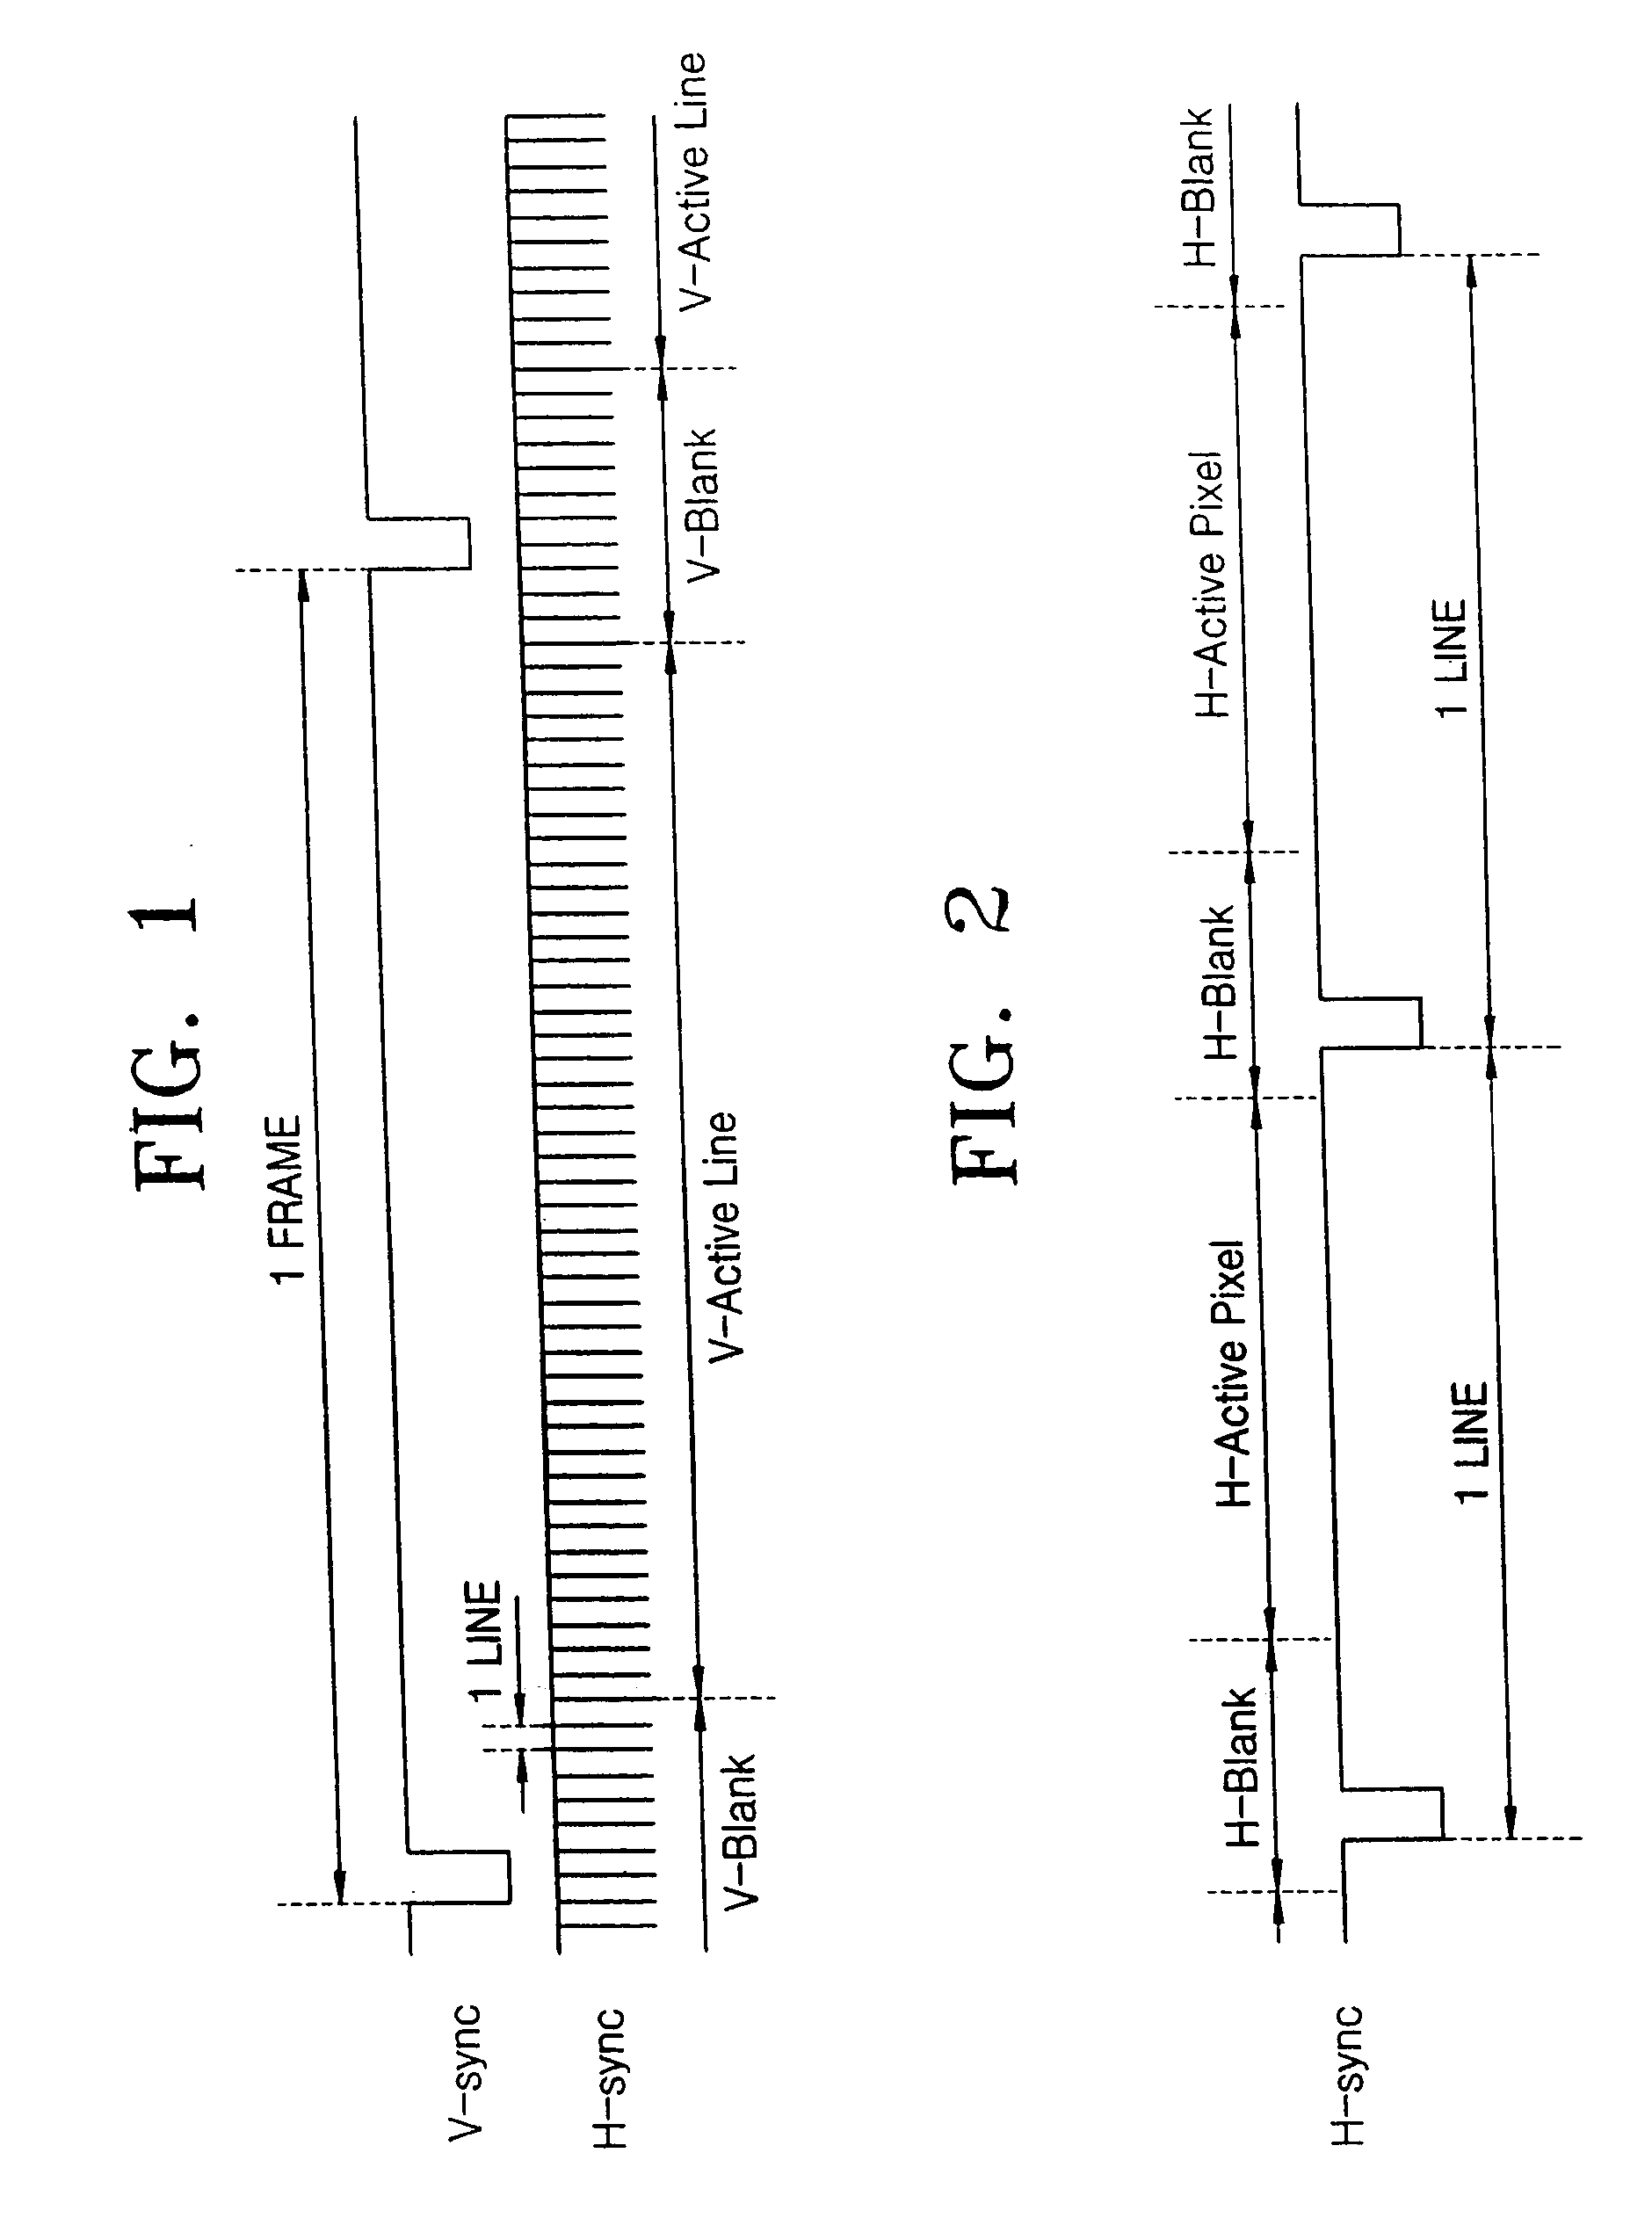 Method and apparatus for scaling image in horizontal and vertical directions